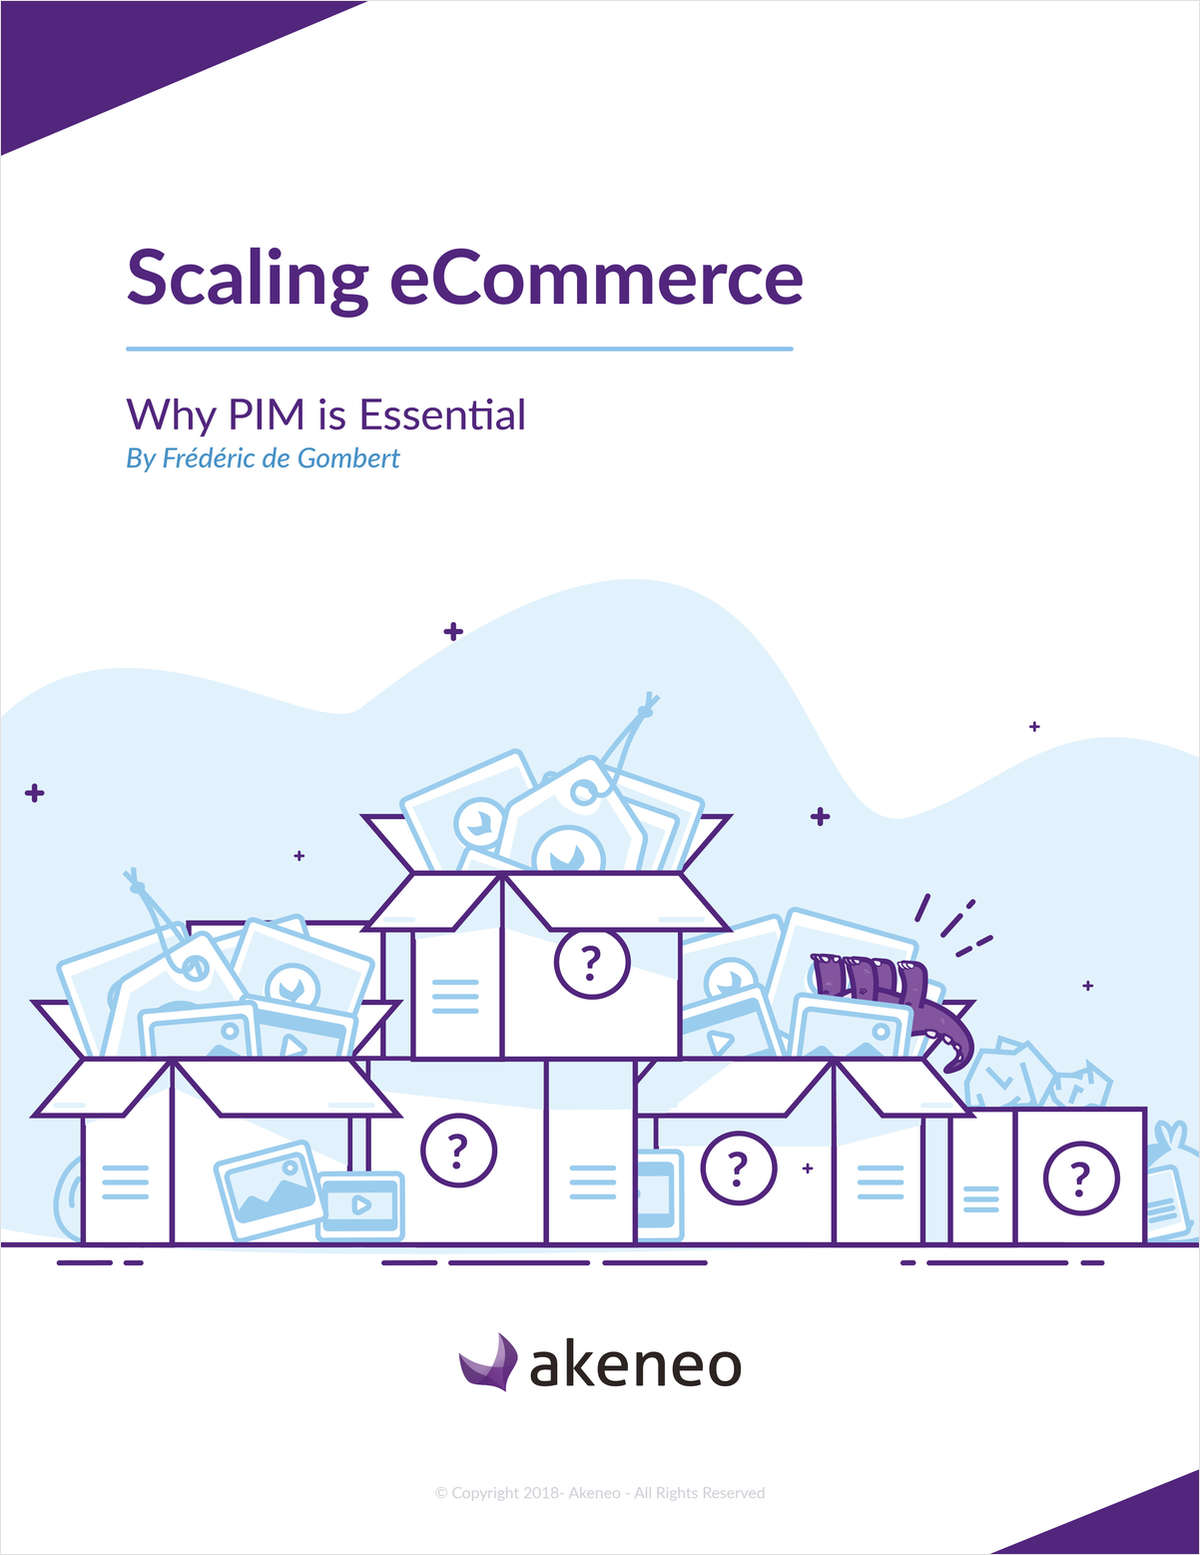 Scaling eCommerce: Why PIM is Essential